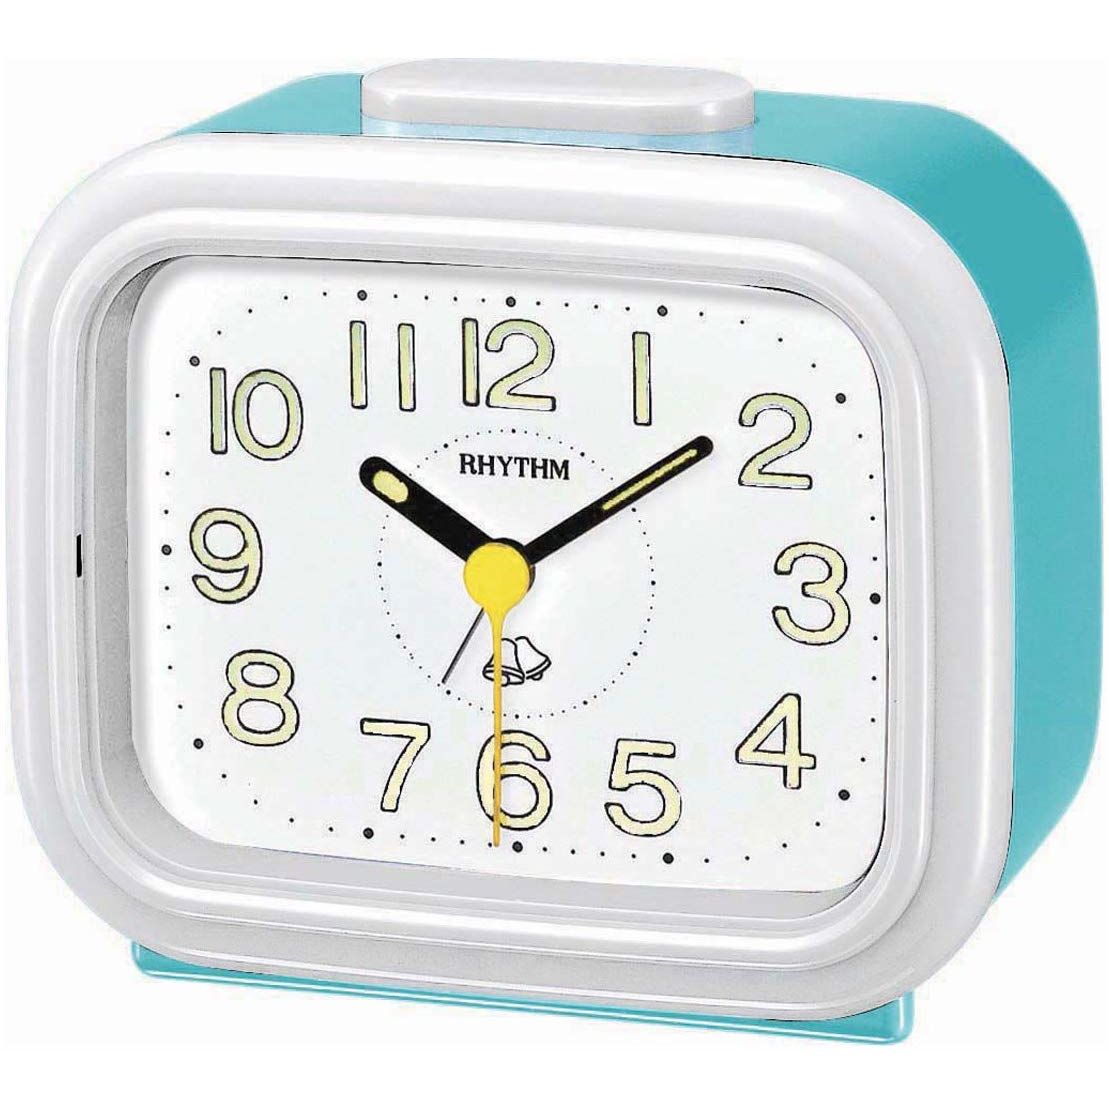 Rhythm Alarm Clock Cyan & White 4RA888R79 | Reliable Timekeeping | Travel | Wake Up Routine | Snooze Function | Battery Operated | Portable | White Face | Halabh.com